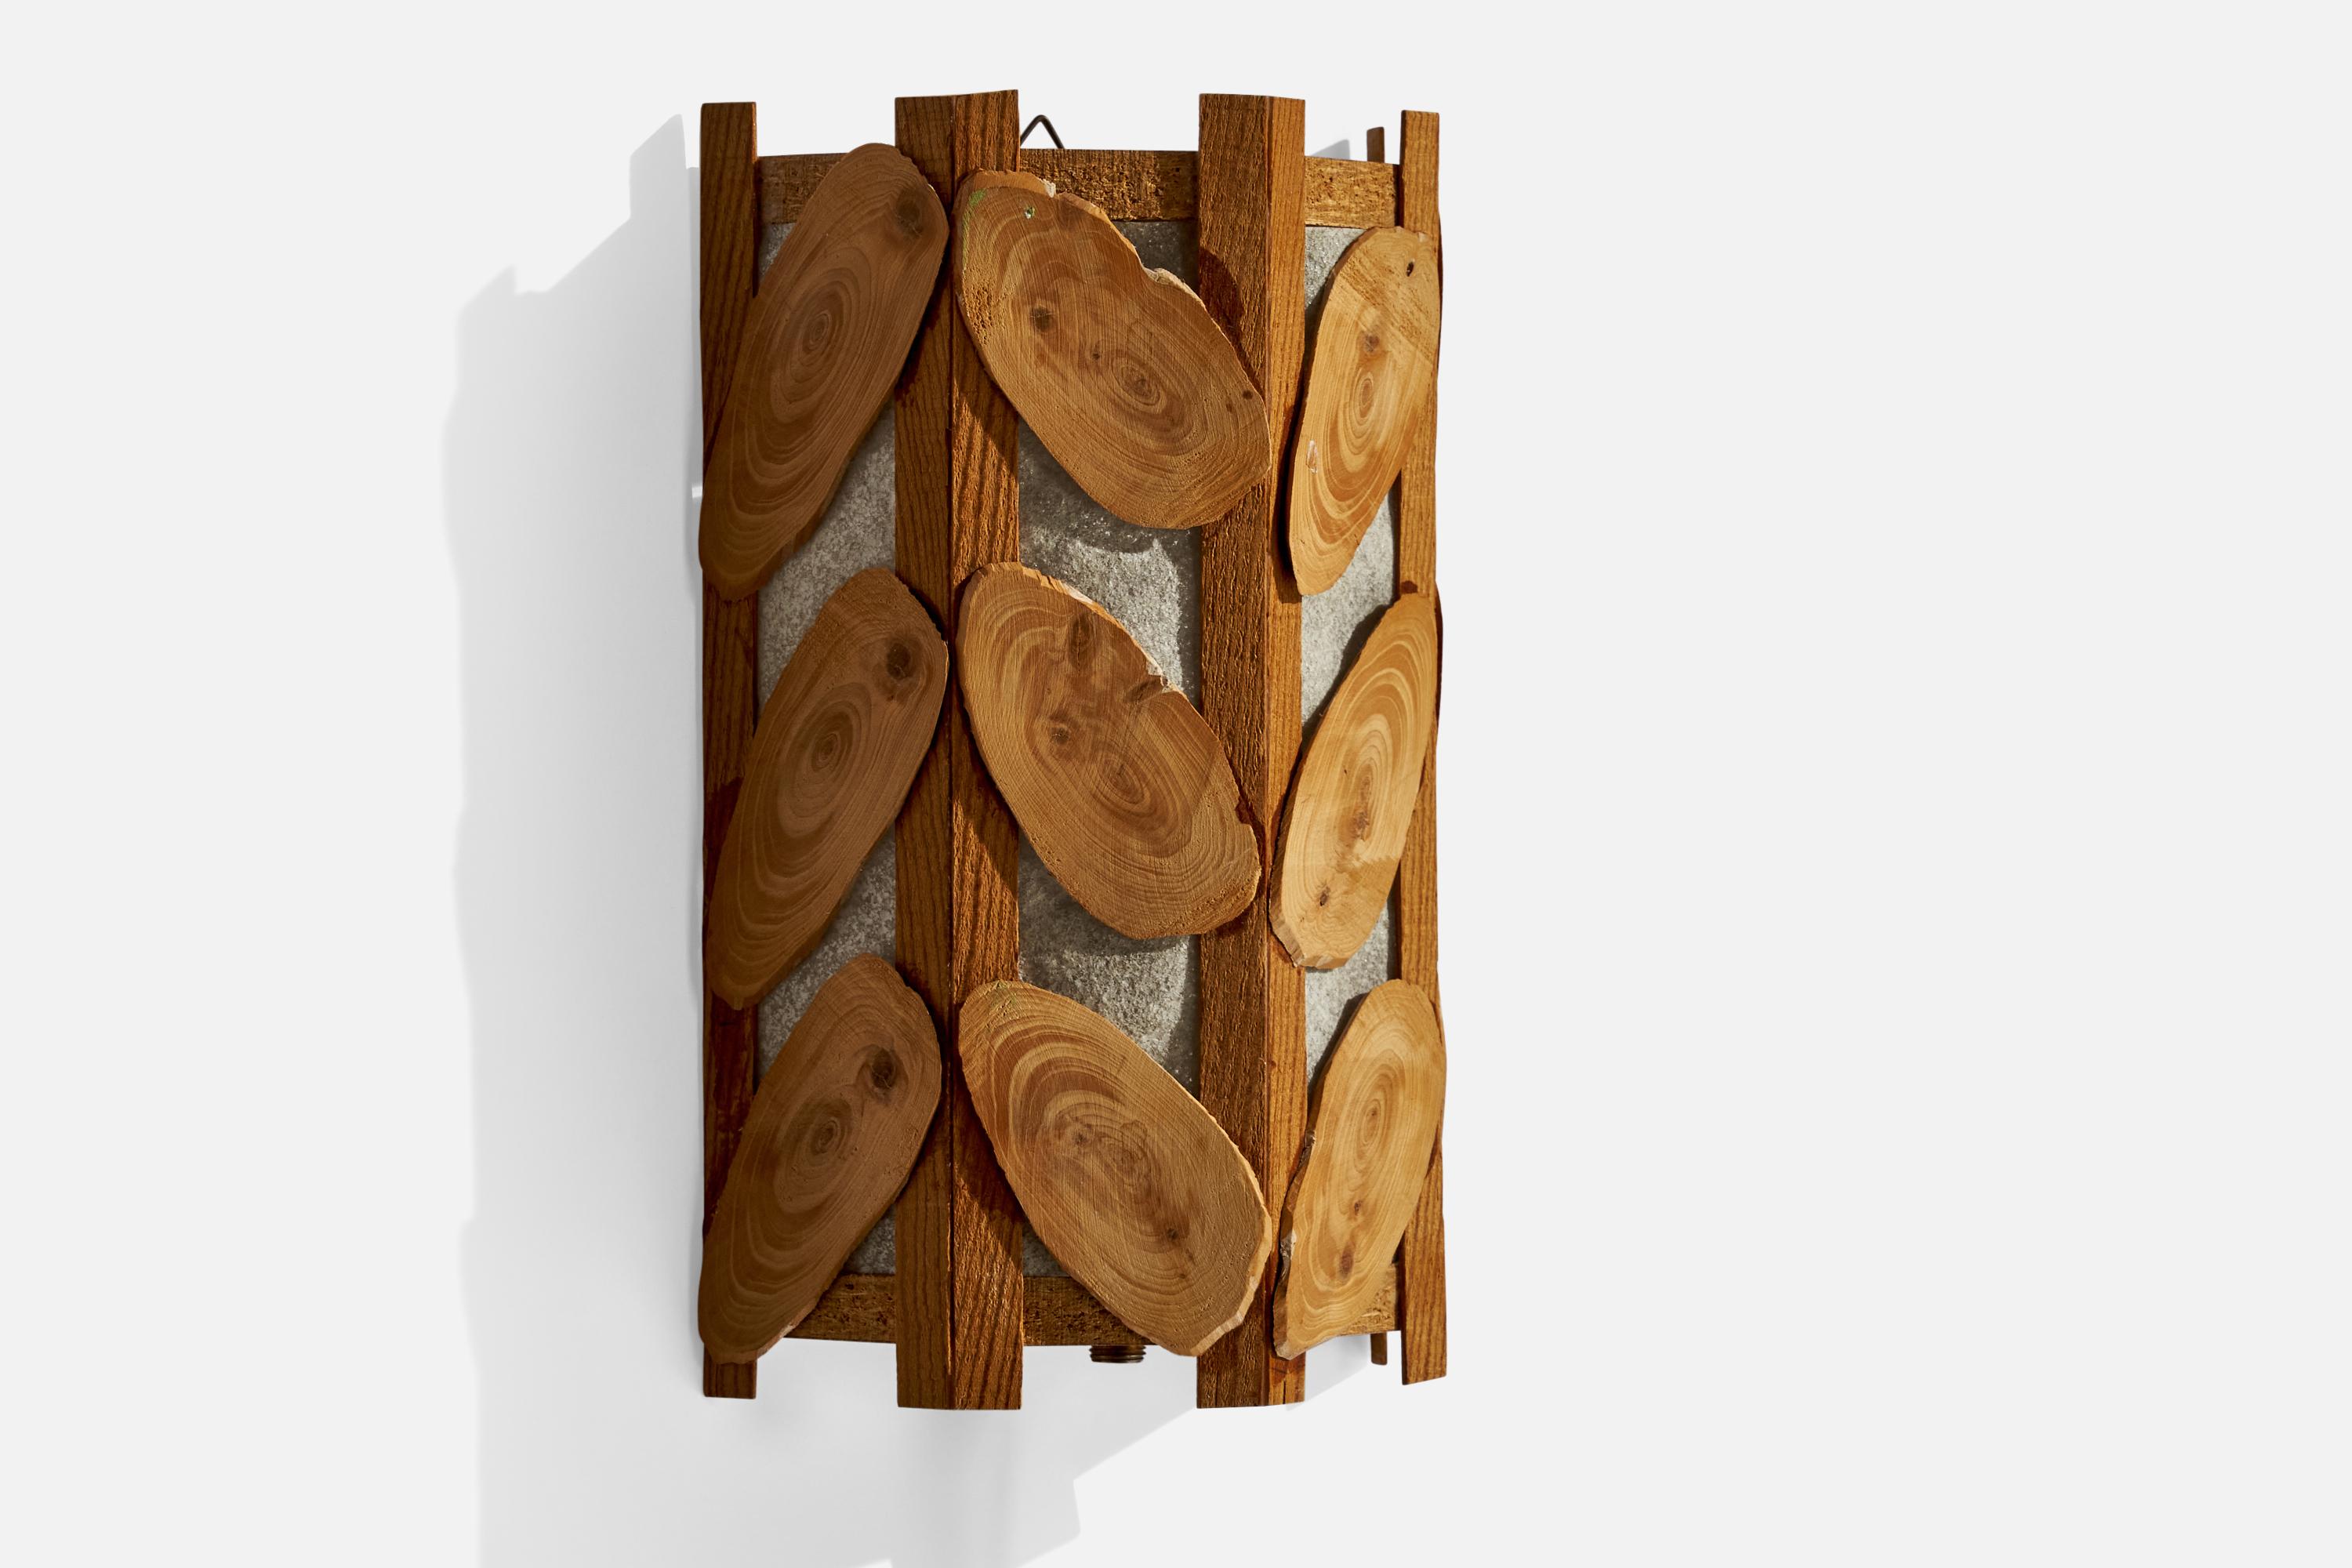 A pine and fabric wall light designed and produced in Sweden, 1970s.

Overall Dimensions (inches): 8.5” H x 5.5”  W x 2.75”  D
Back Plate Dimensions (inches): N/A
Bulb Specifications: E-14 Bulb
Number of Sockets: 1
All lighting will be converted for